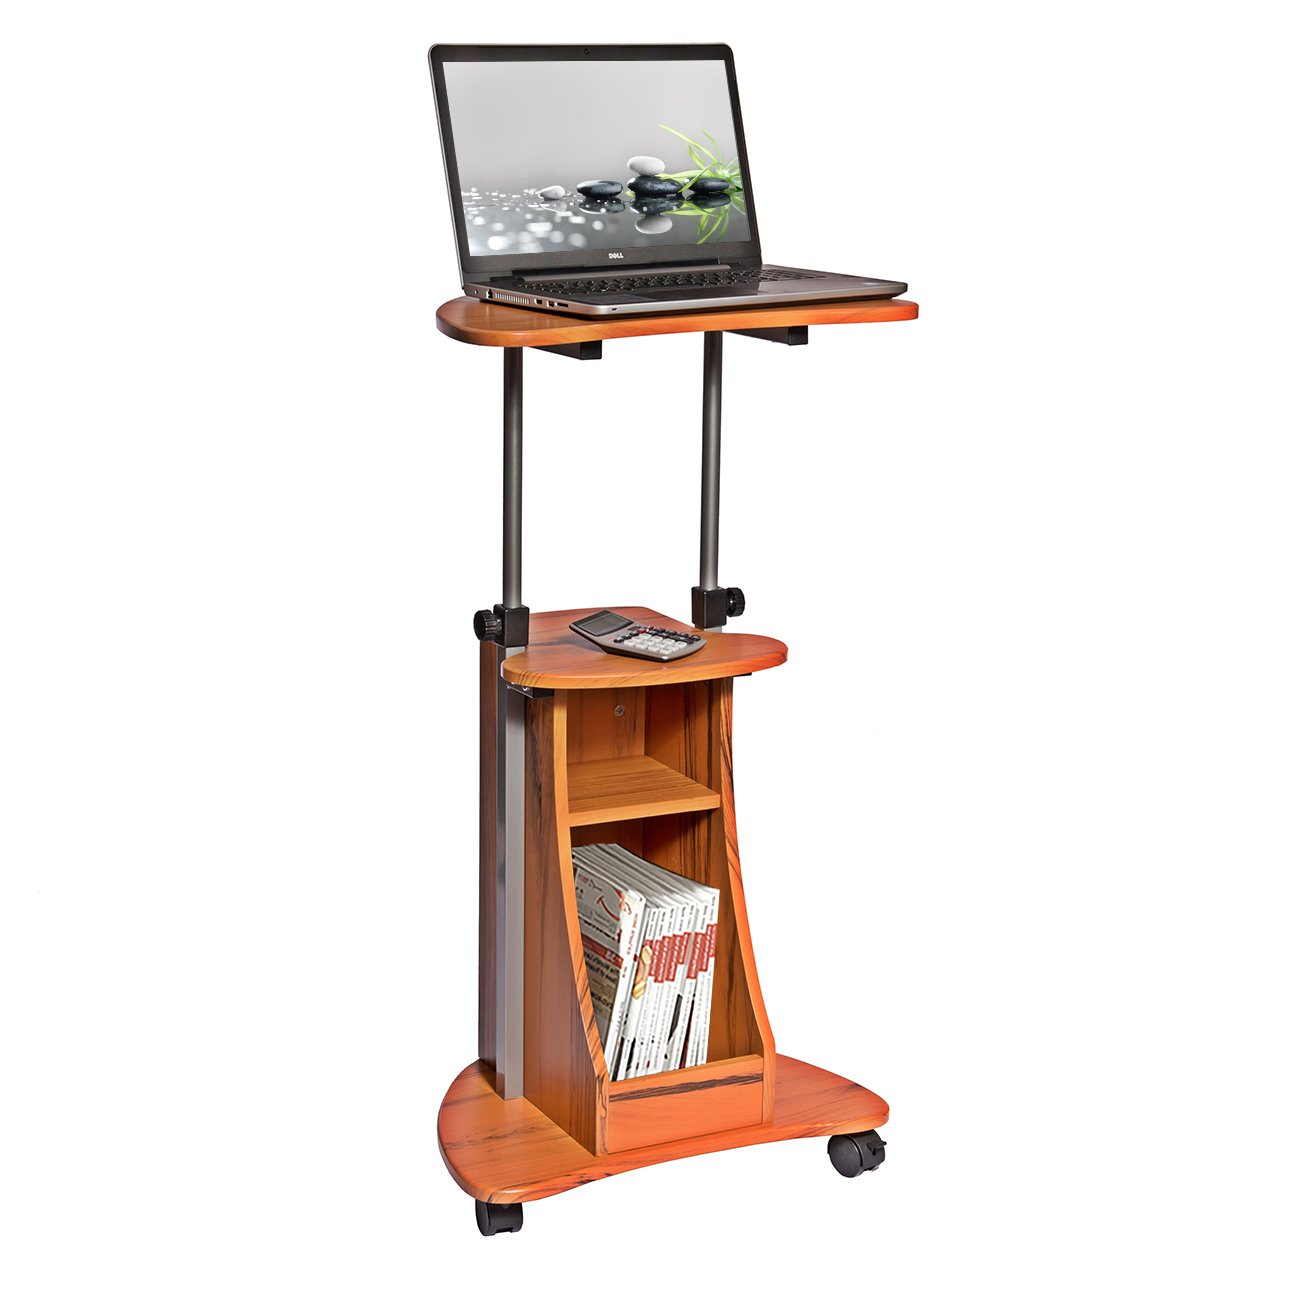 Picture of Techni Mobili RTA-B002-WG01 Rolling Laptop Cart with Storage - Wood Grain